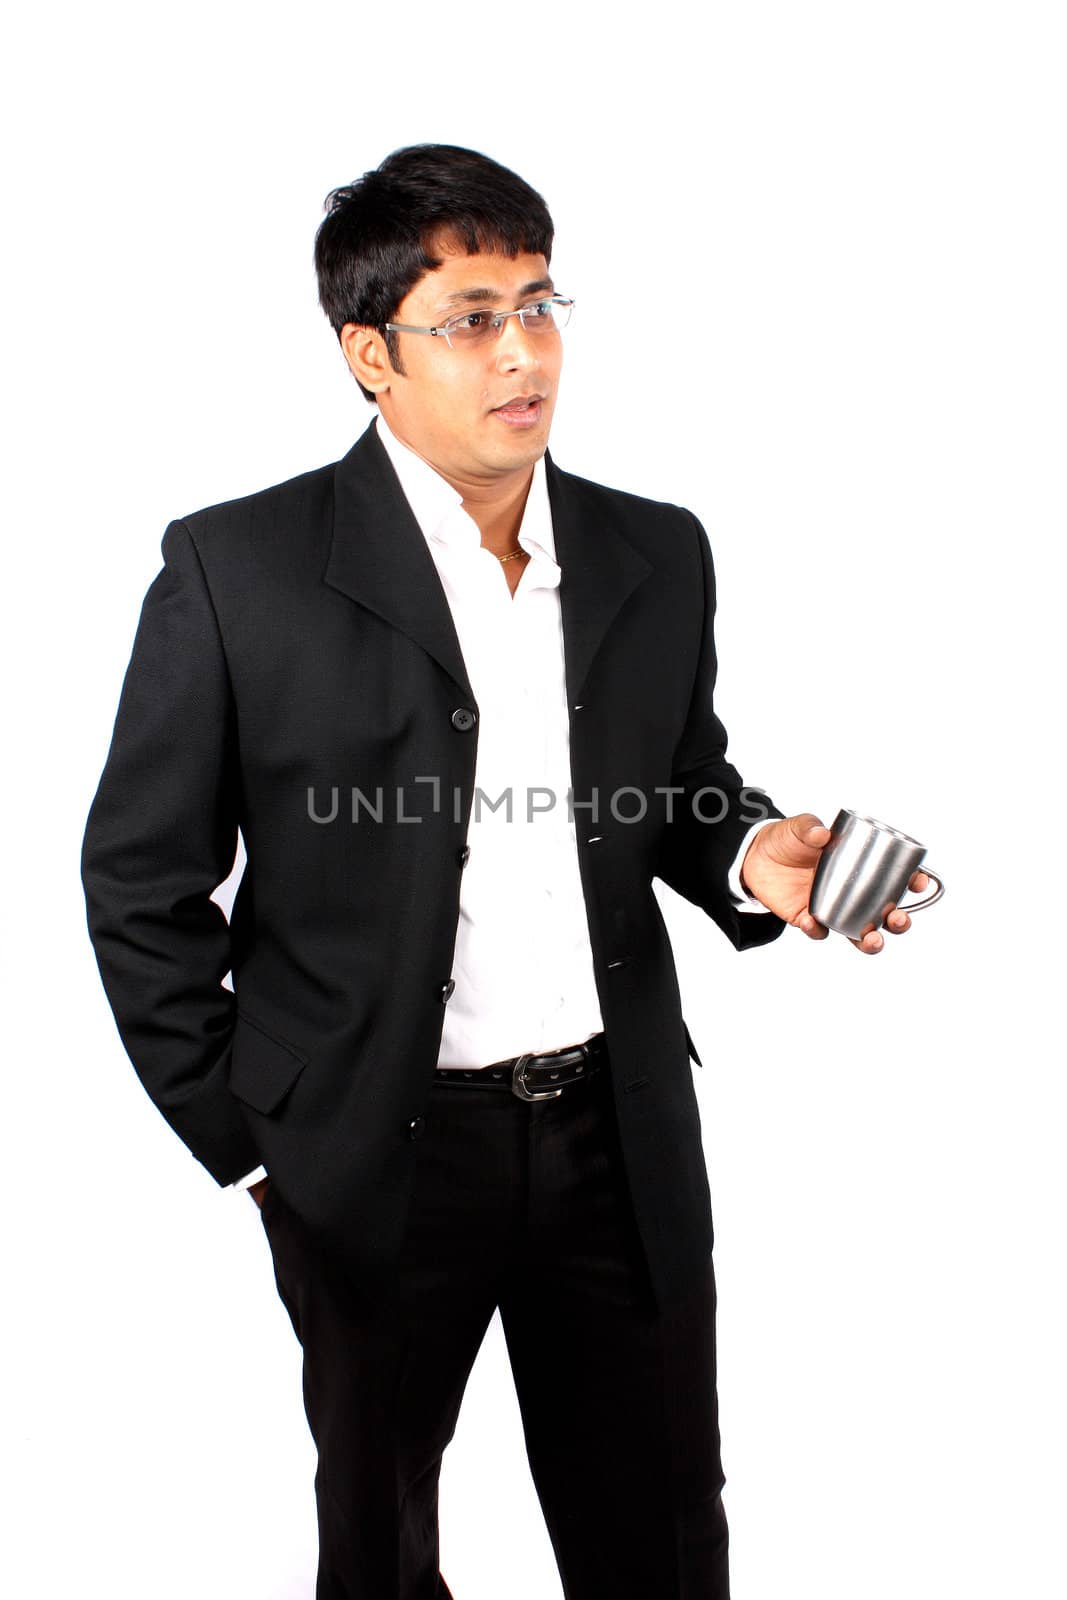 An Indian businessman holding a coffee cup in conversation, on white studio background.